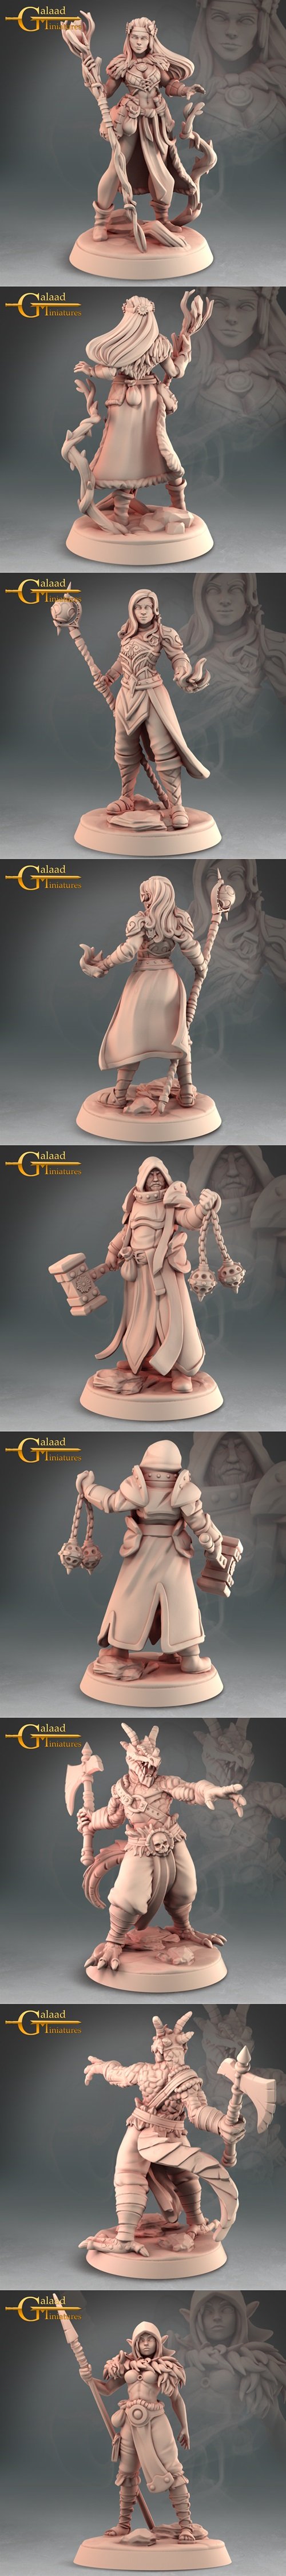 Into The Woods - Heroes – 3D Printable STL